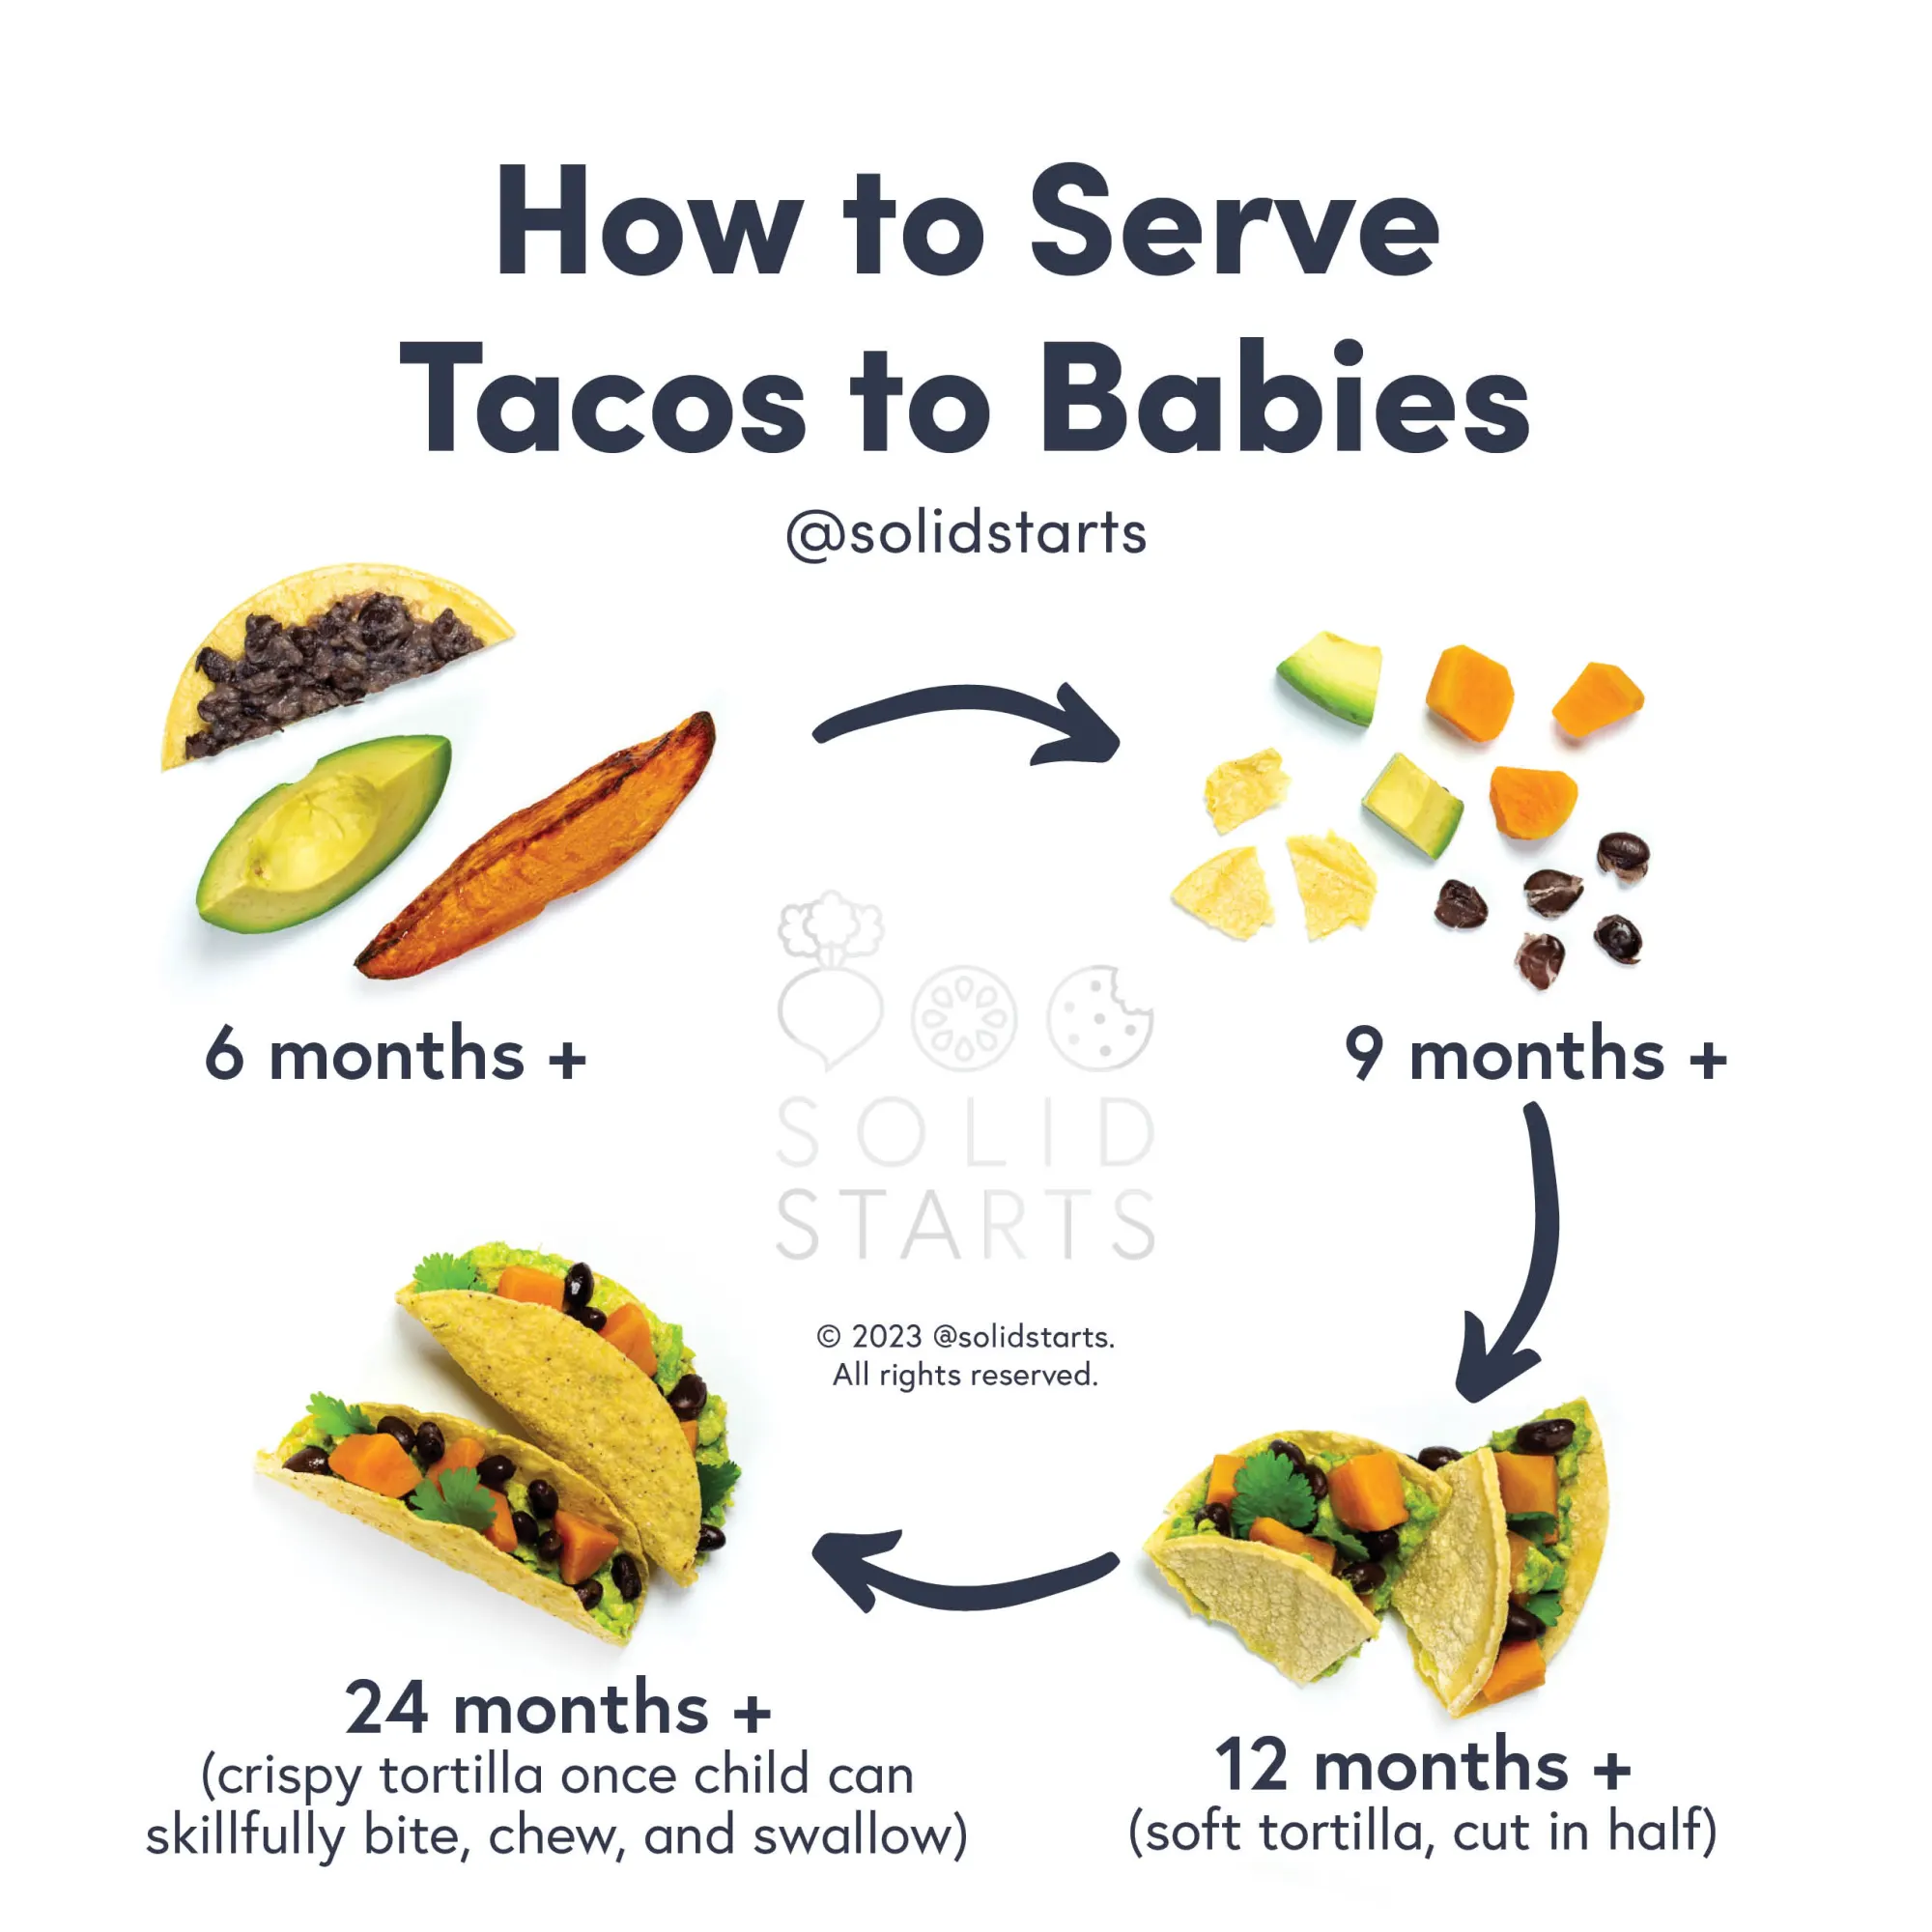 How to Serve Tacos to Babies